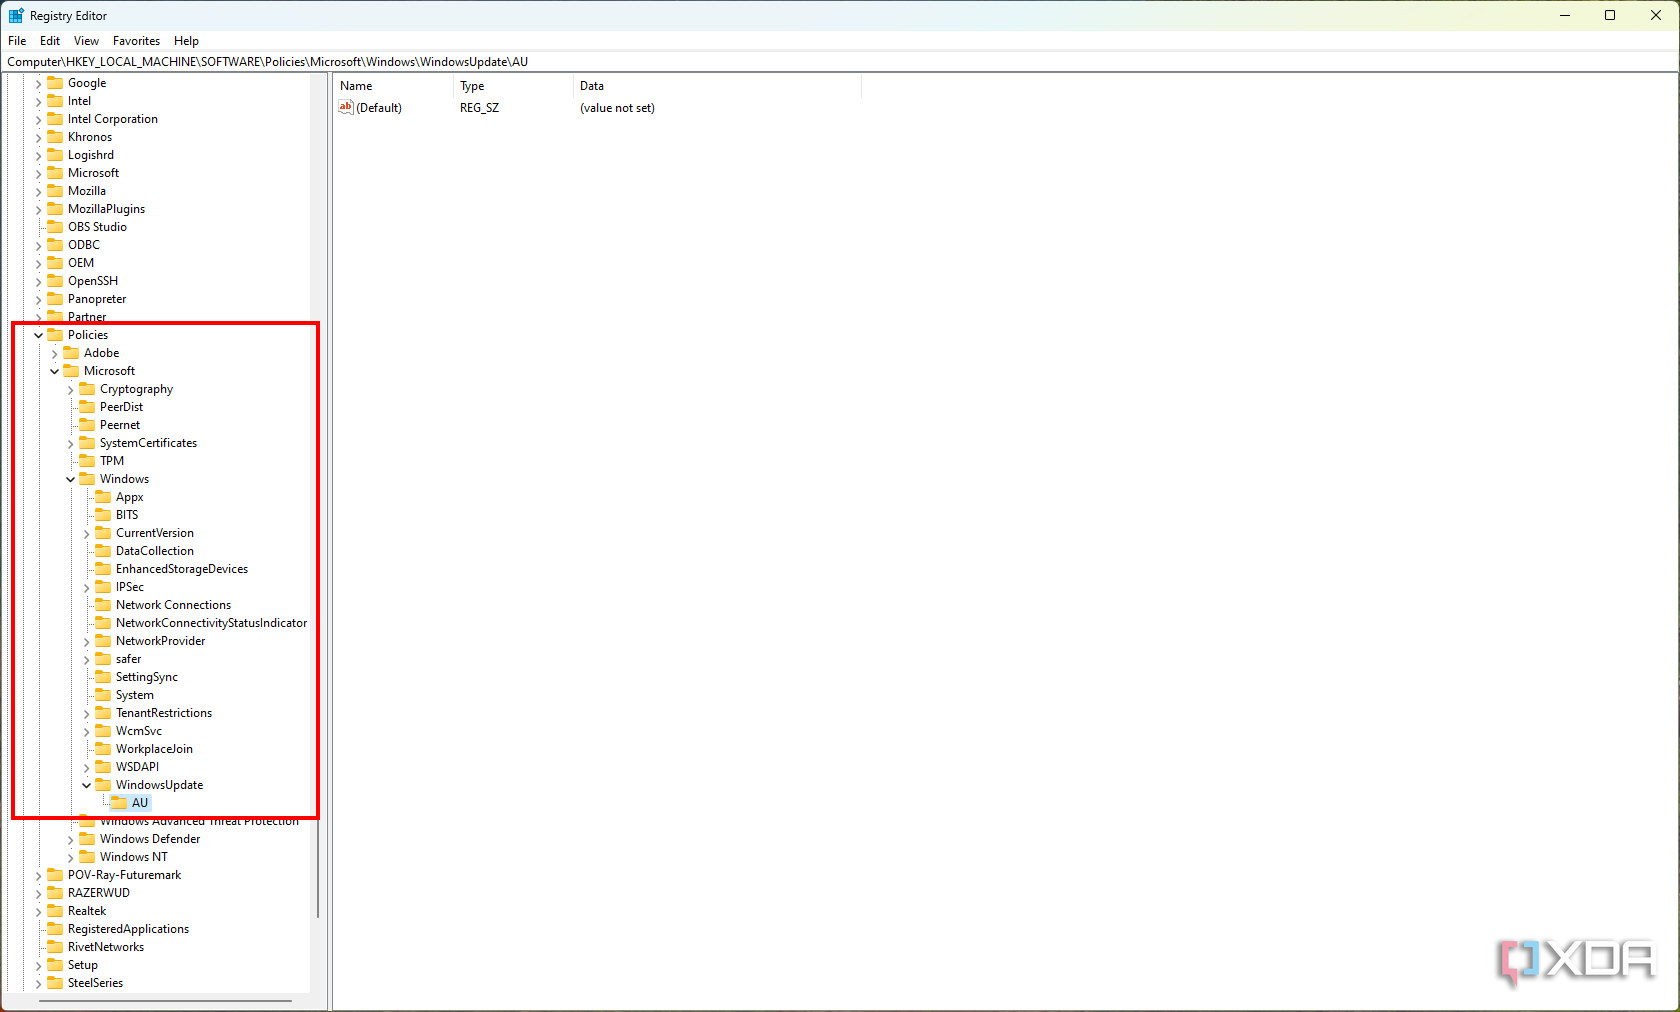 Screenshot of Registry Editor with the current folder structure highlighted